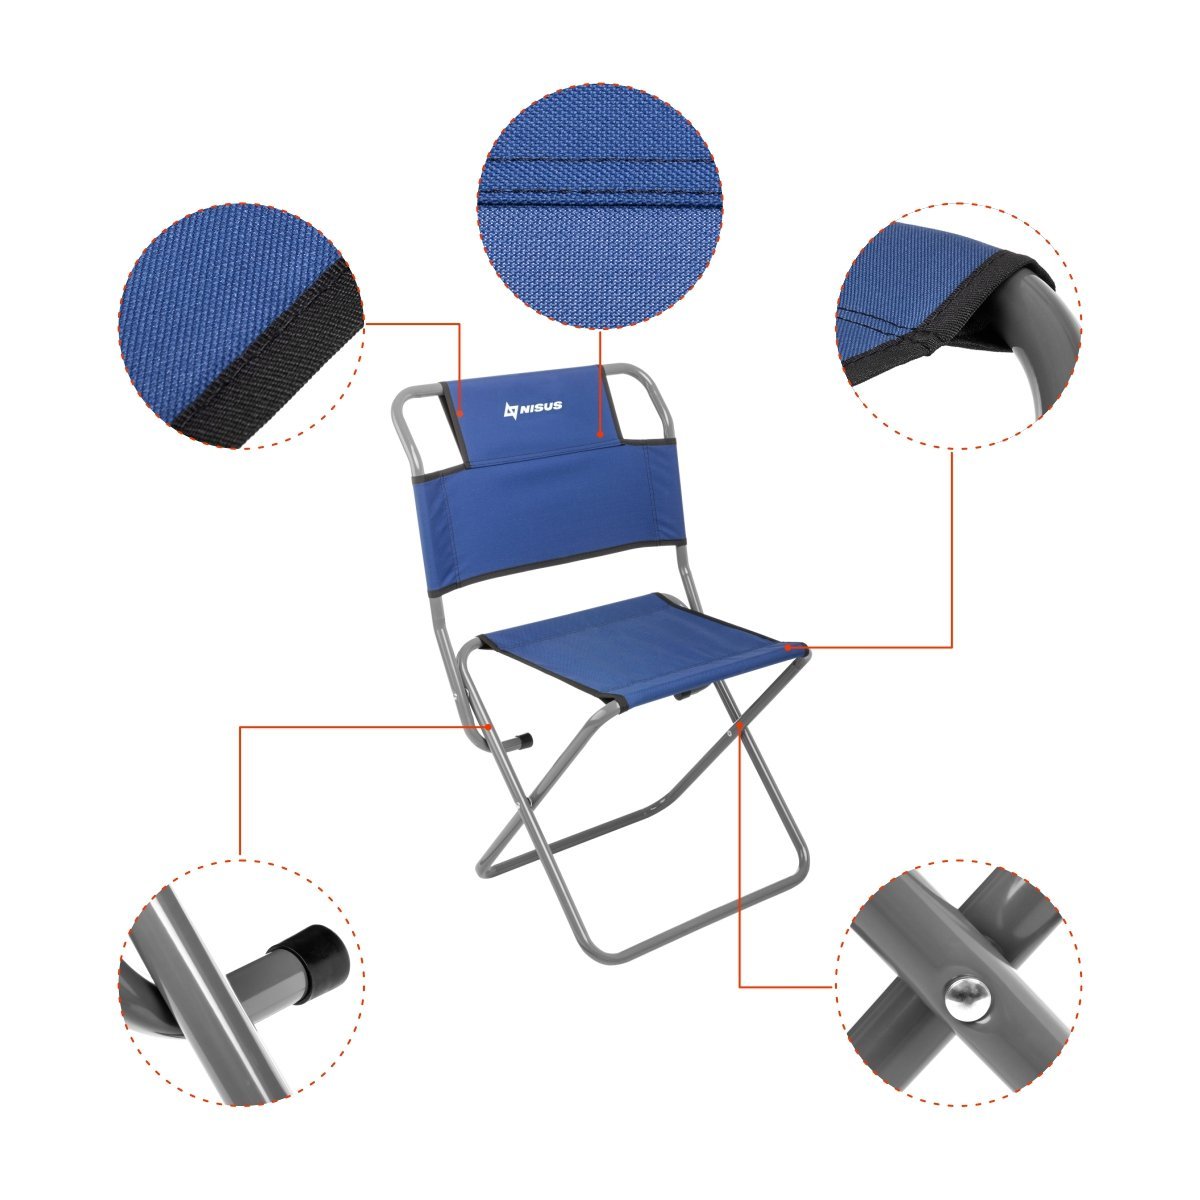 Blue camping chair with back support Oxford fabric and steel pole